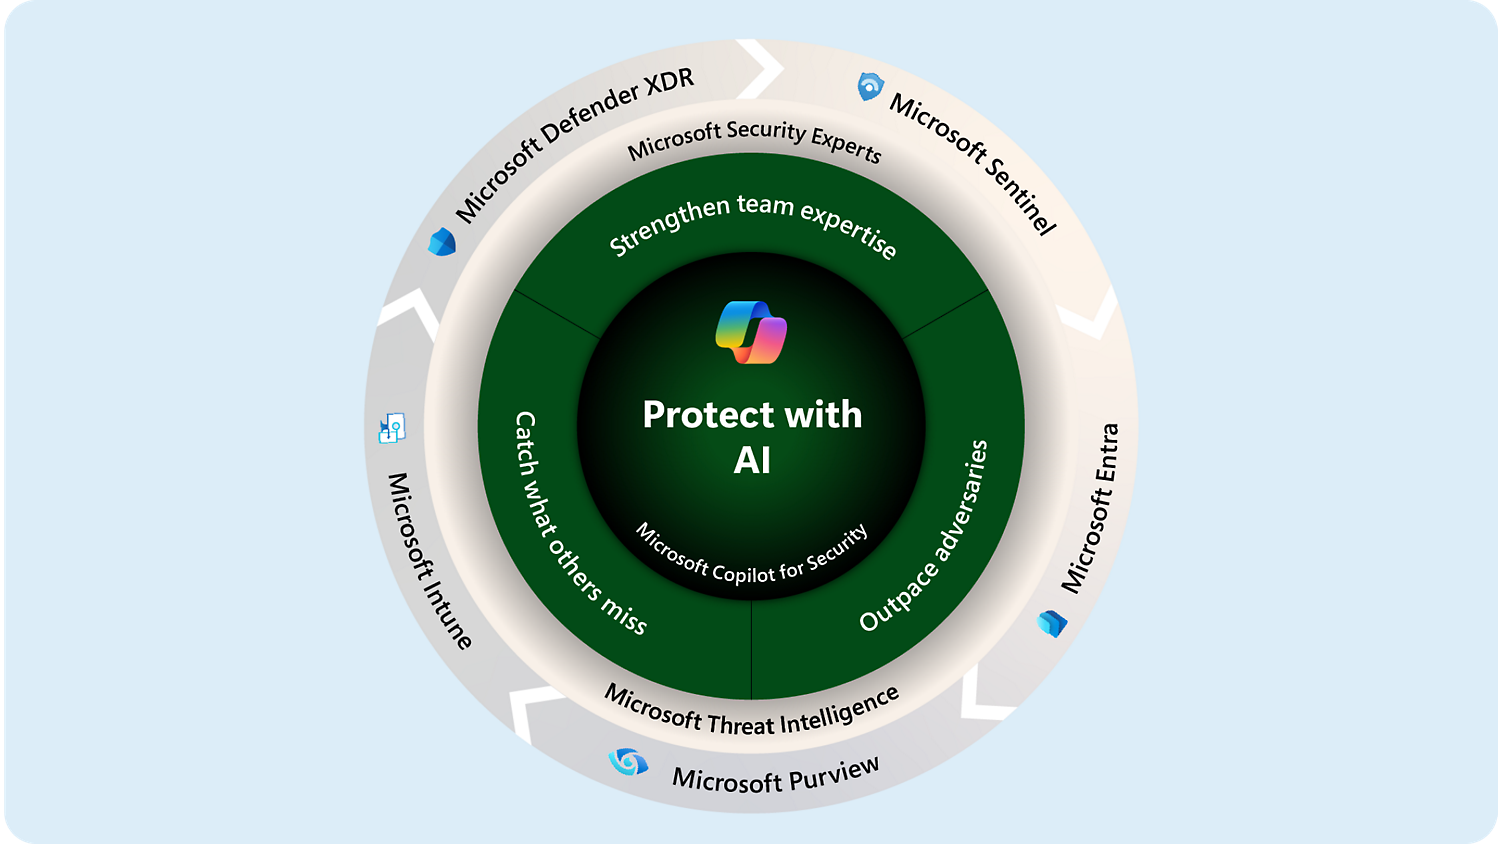 Microsoft Defender XDR, Sentinel, Entra, and other security solutions for comprehensive cloud protection